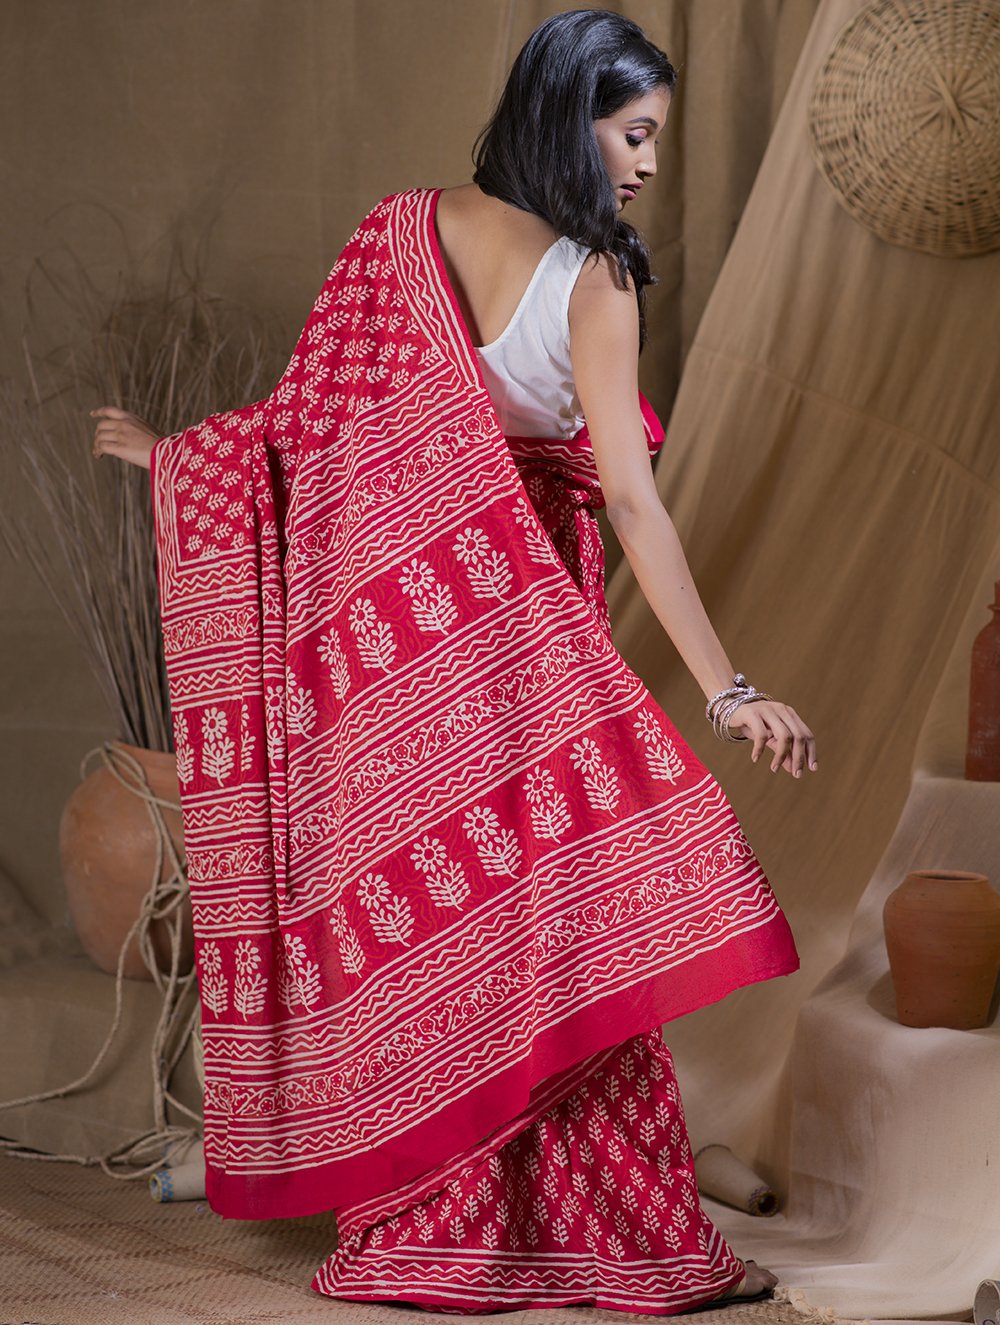 Load image into Gallery viewer, Bagru Block Printed Mul Cotton Saree - Deep Coral &amp; White